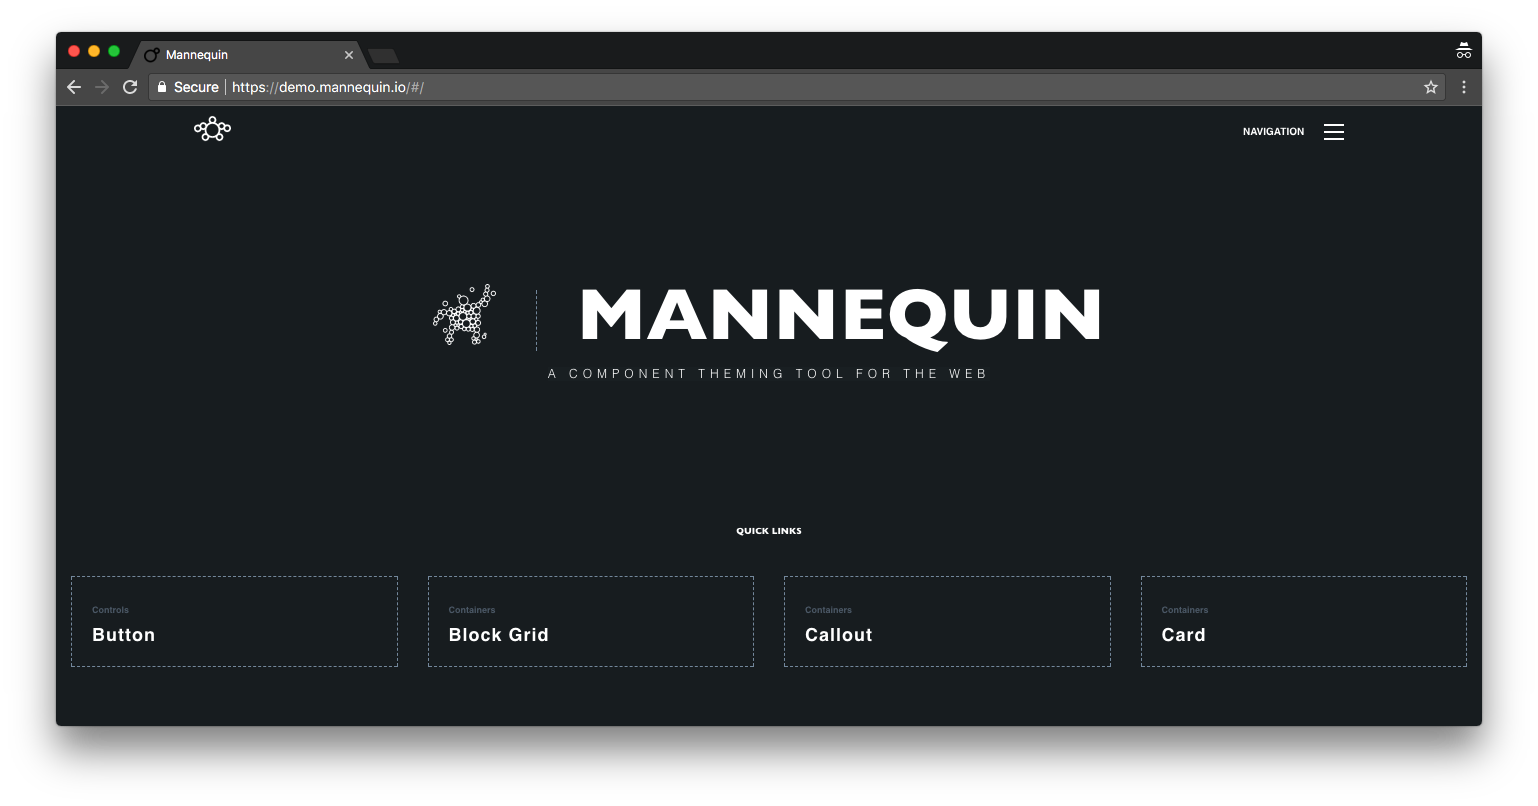 Screenshot of the Mannequin website. The mascot waves hello next to the site title and navigation.